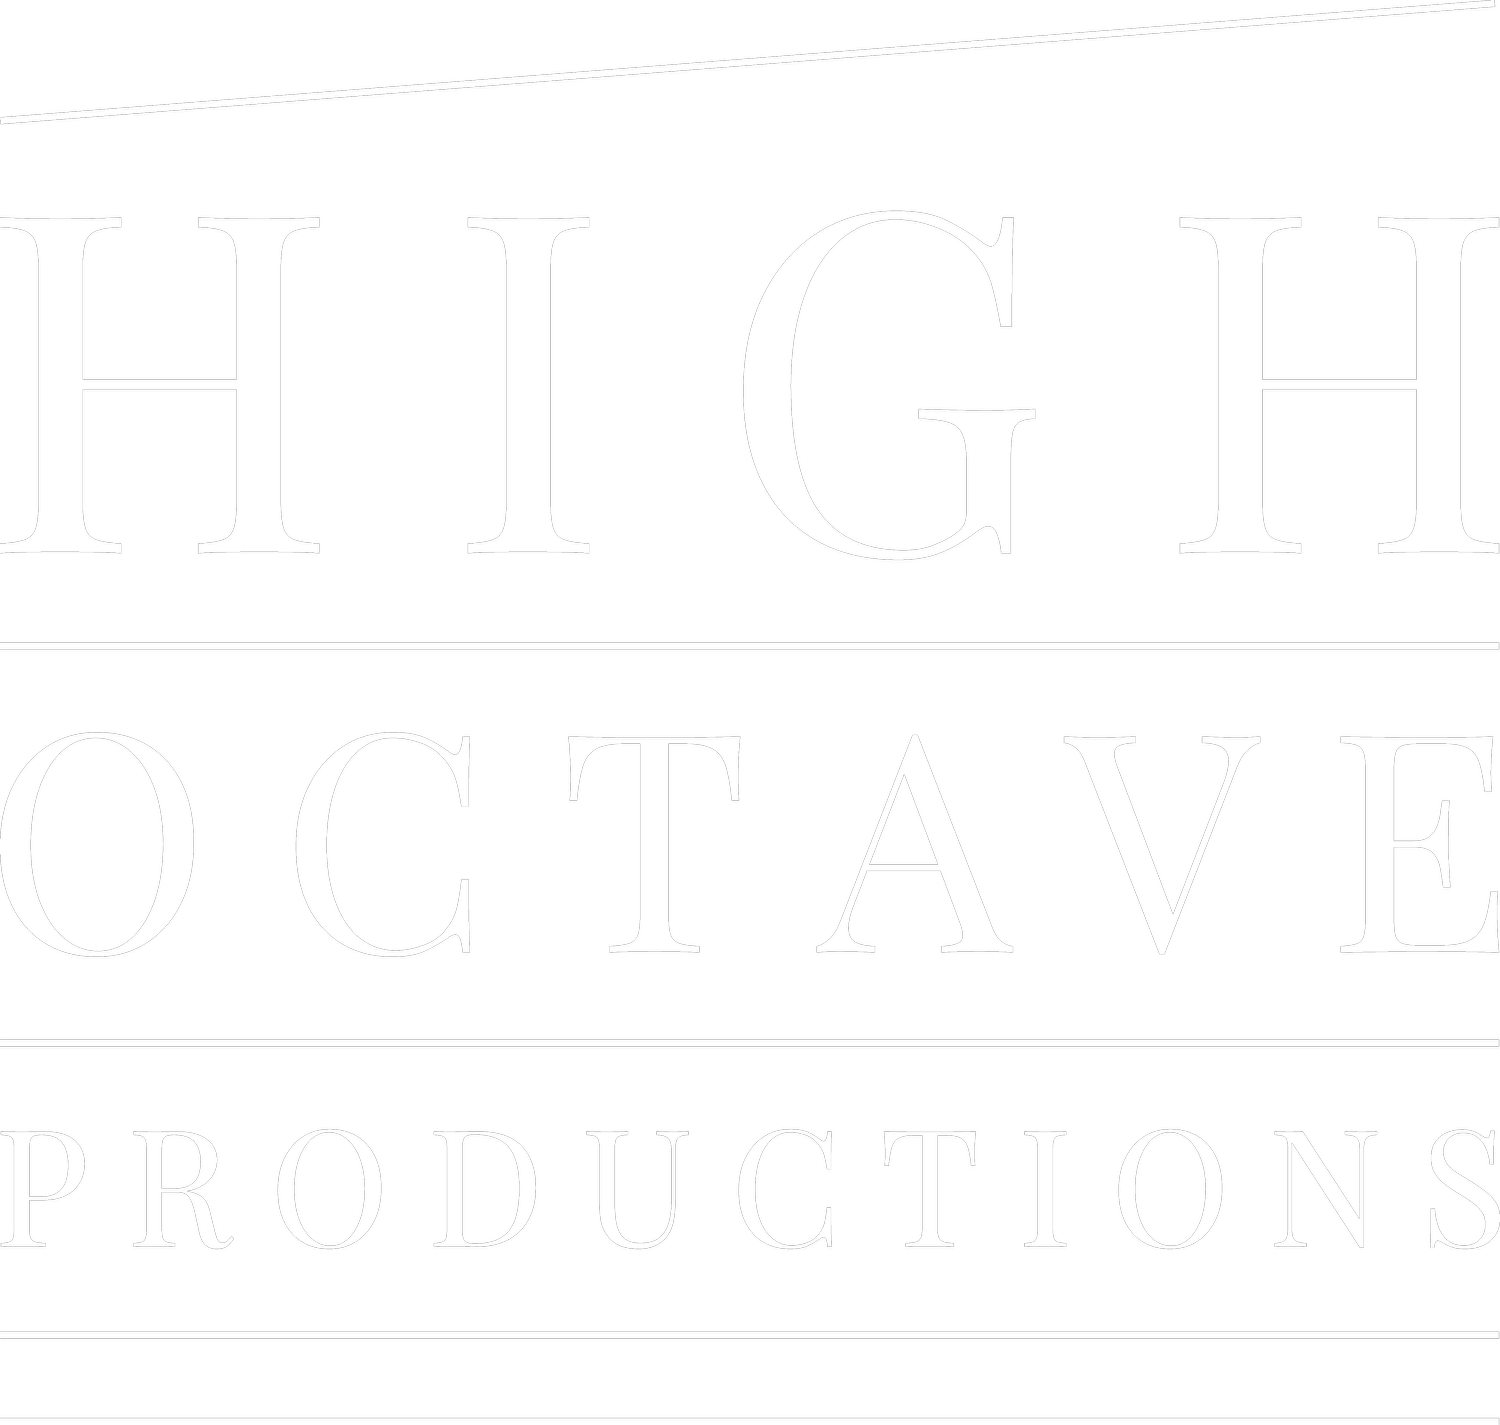 High Octave Productions